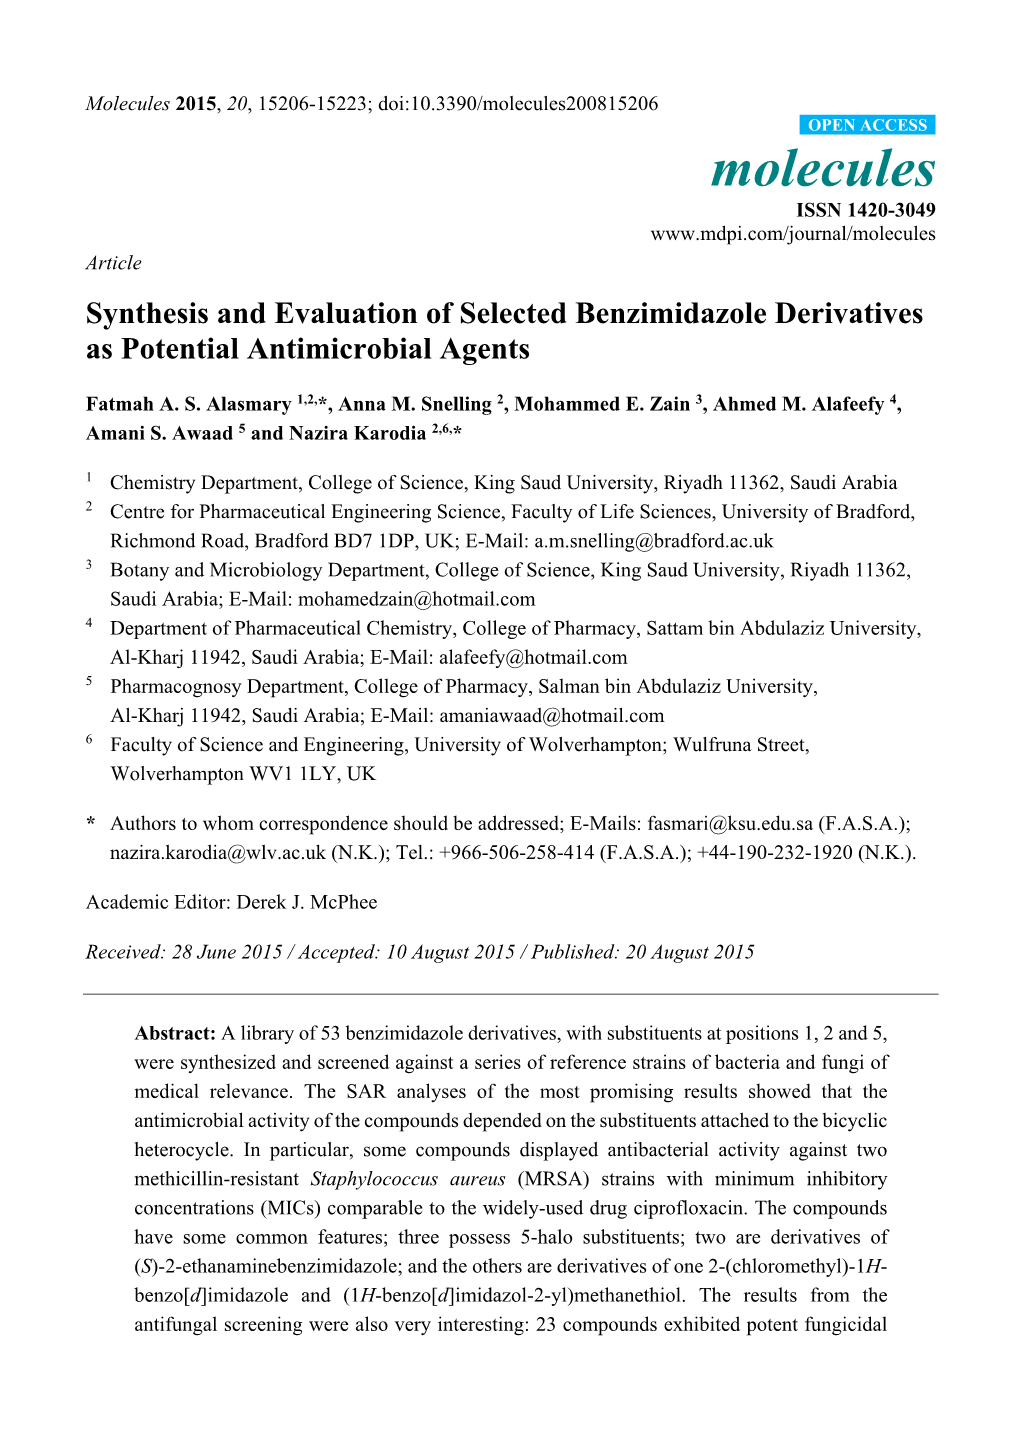 Synthesis and Evaluation of Selected Benzimidazole Derivatives As Potential Antimicrobial Agents